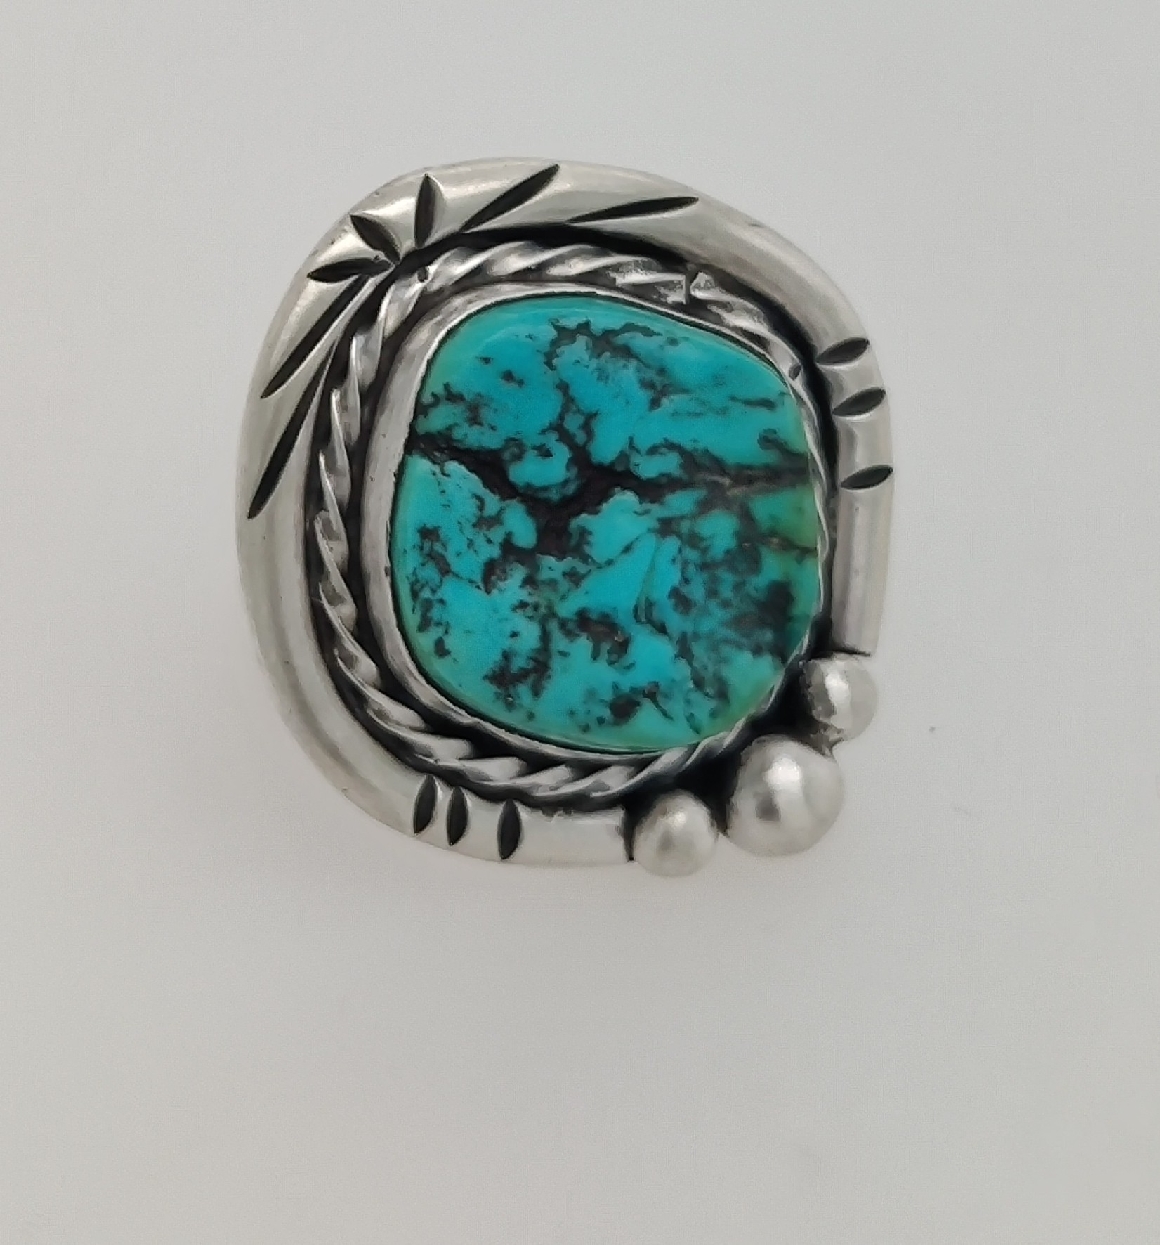 Sterling Silver Turquoise Ring with Halo Design and Bead Accents Size 5